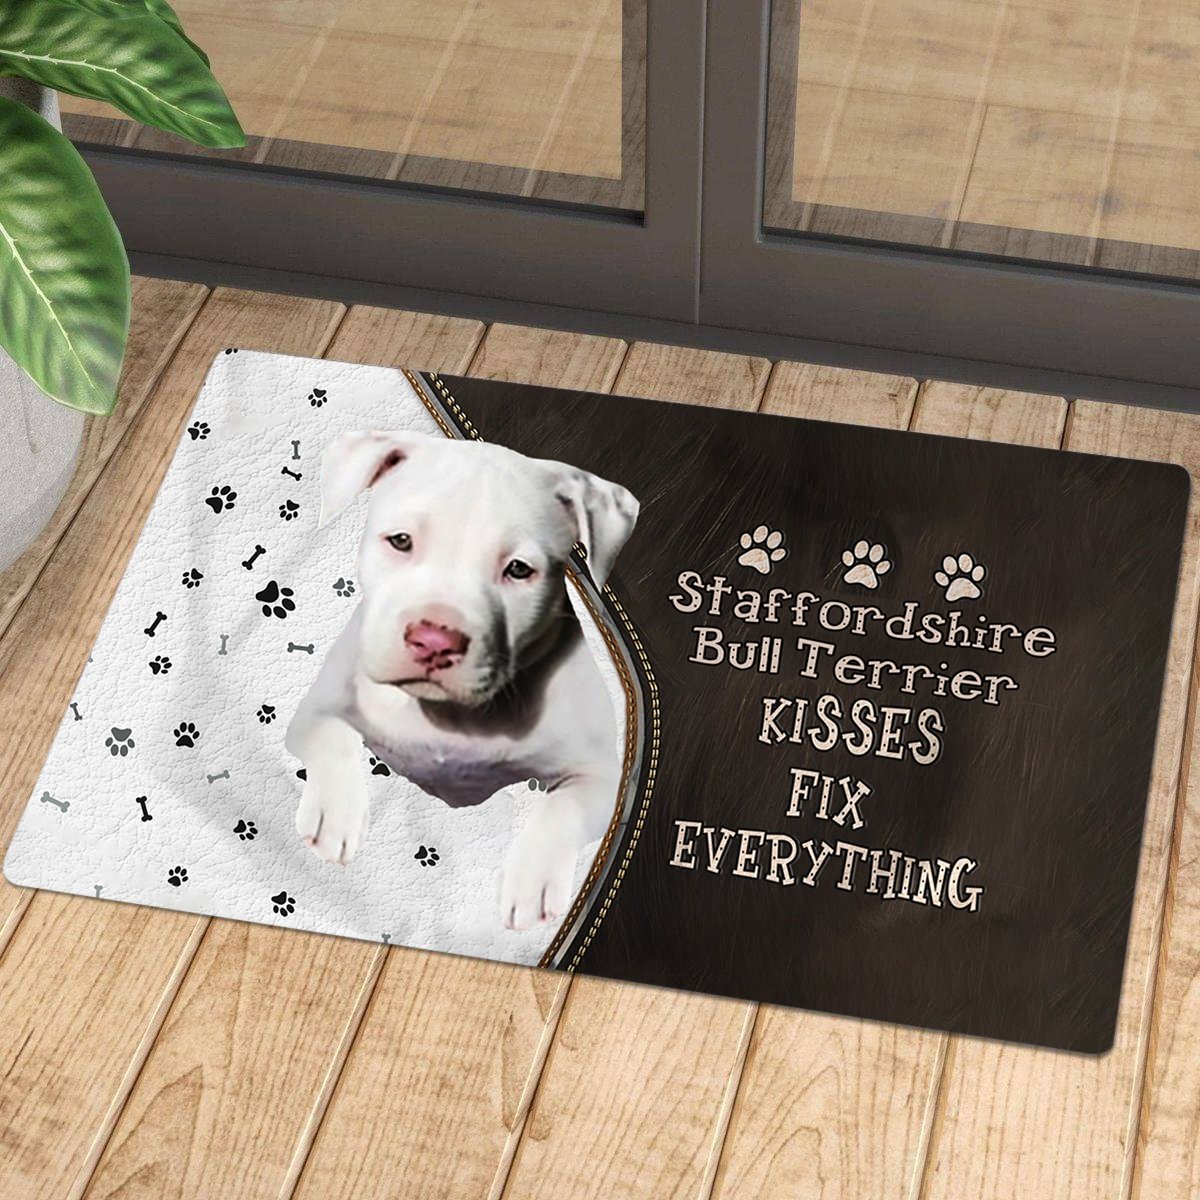 Staffordshire-Bull-Terrier2 Kisses Fix Everything Doormat